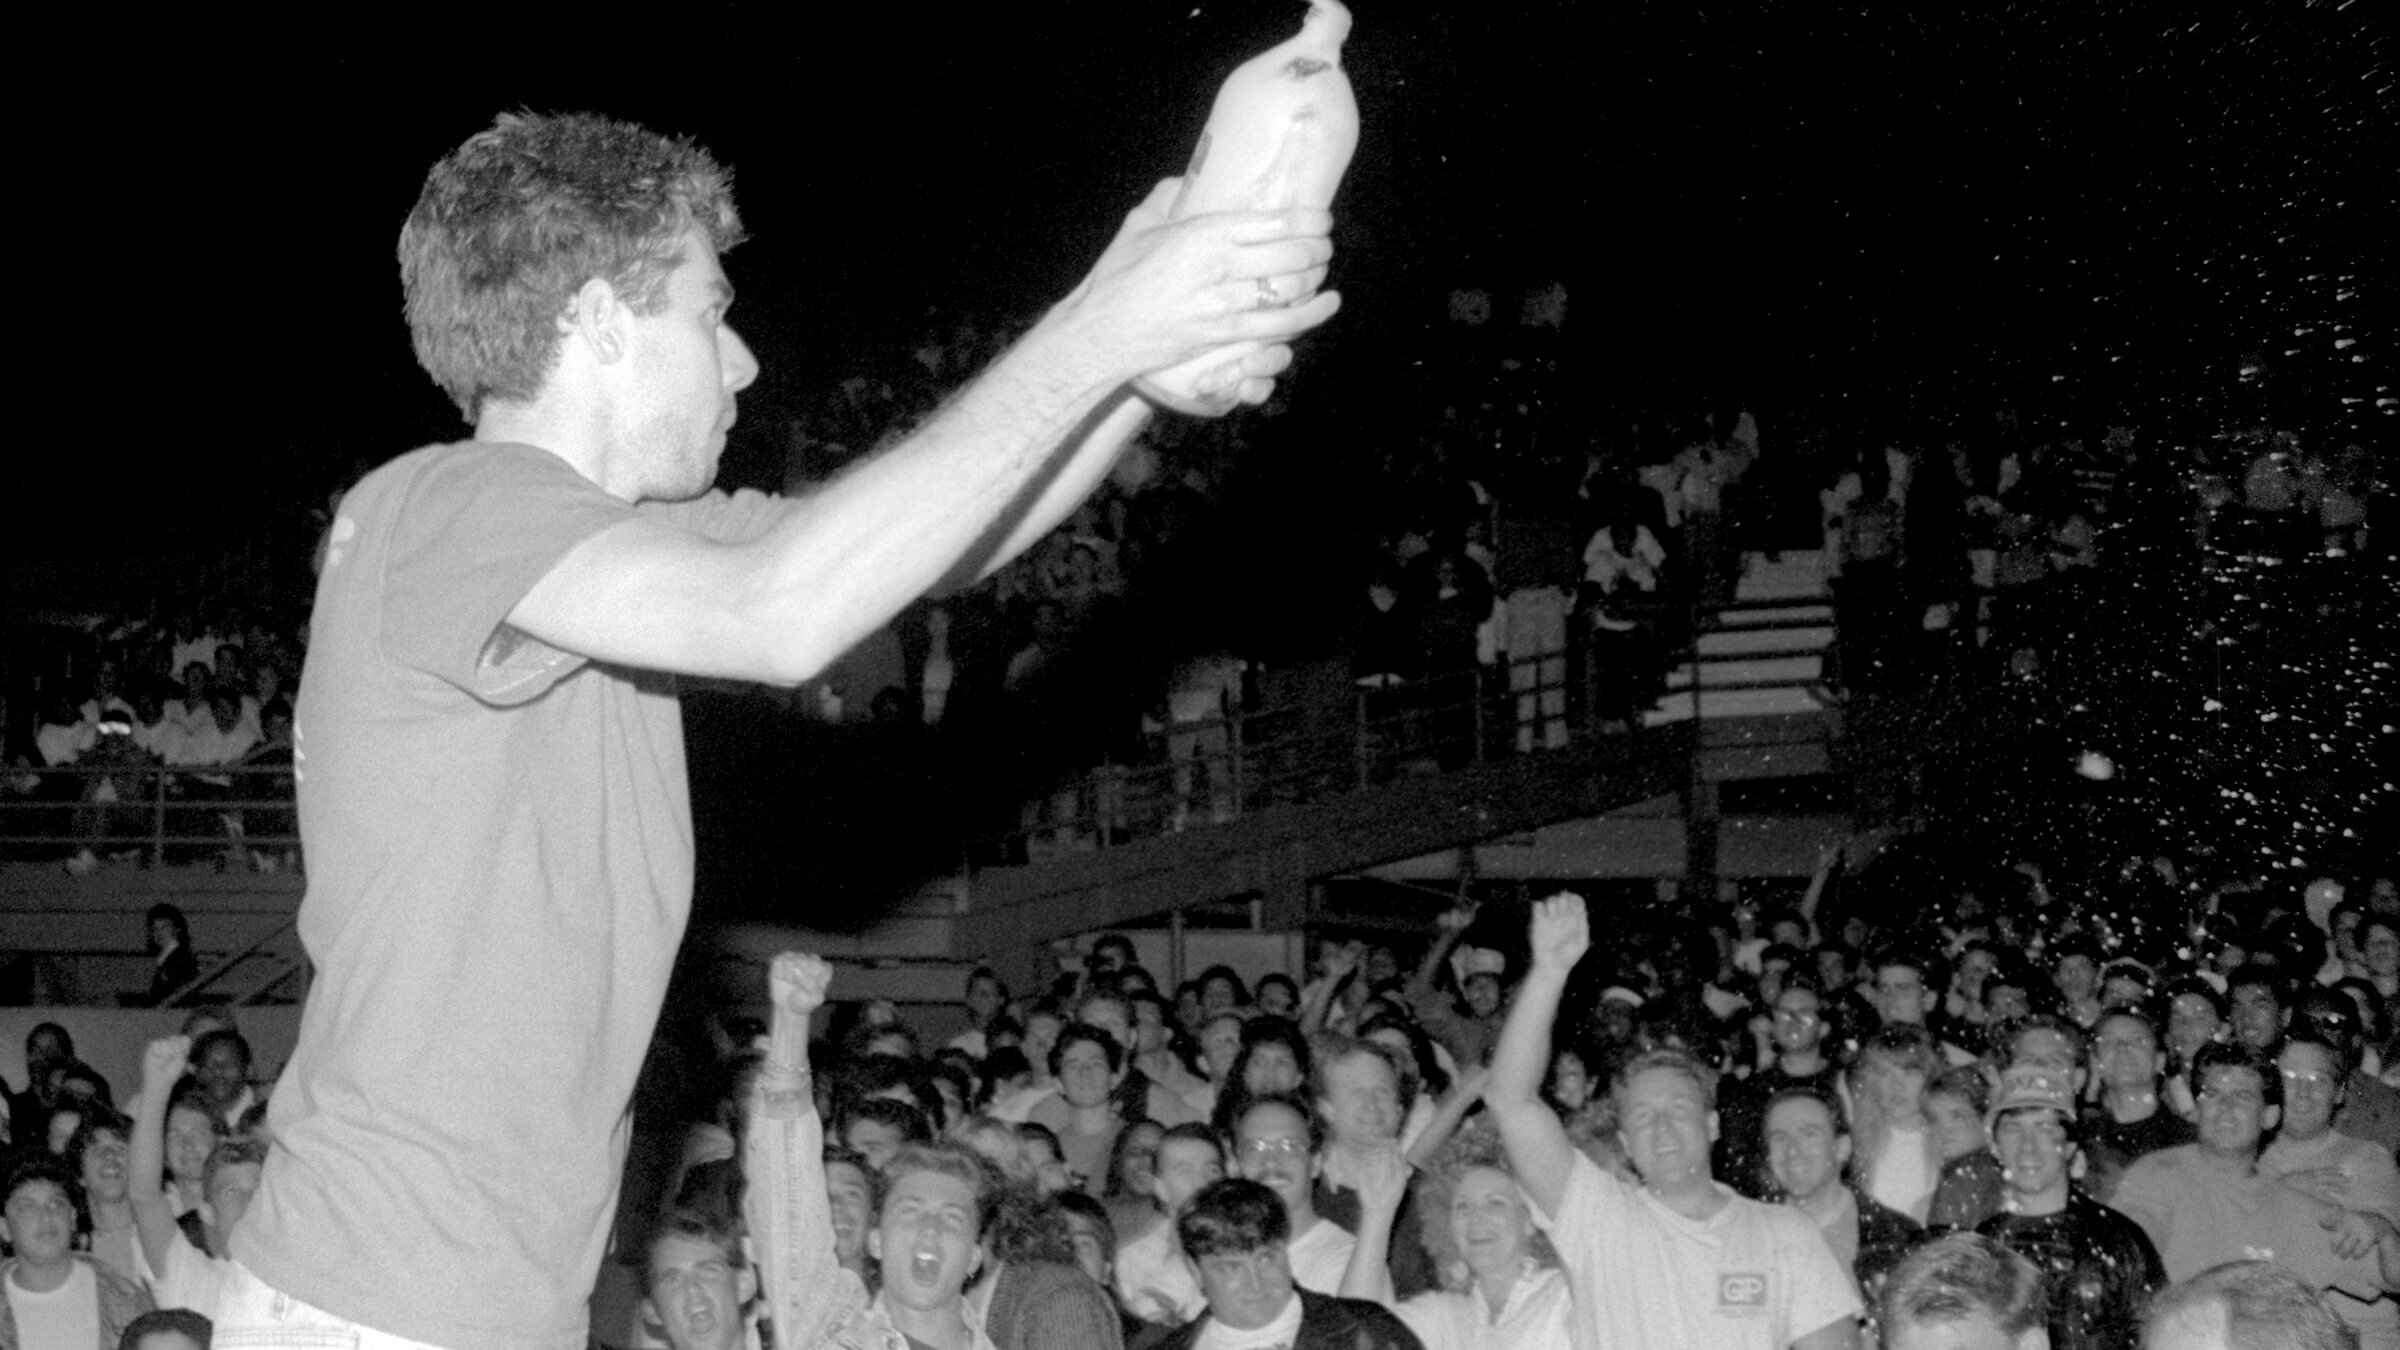 LOS ANGELES, CA - JUNE, 1987: American rapper, bass player and filmmaker Adam Yauch, aka MCA, (1964-2012) of the American hip hop group The Beastie Boys, throws beer on the crowd during a concert circa June, 1987 at the Greek Theatre in Los Angeles, California. (Photo by Lester Cohen/Getty Images)